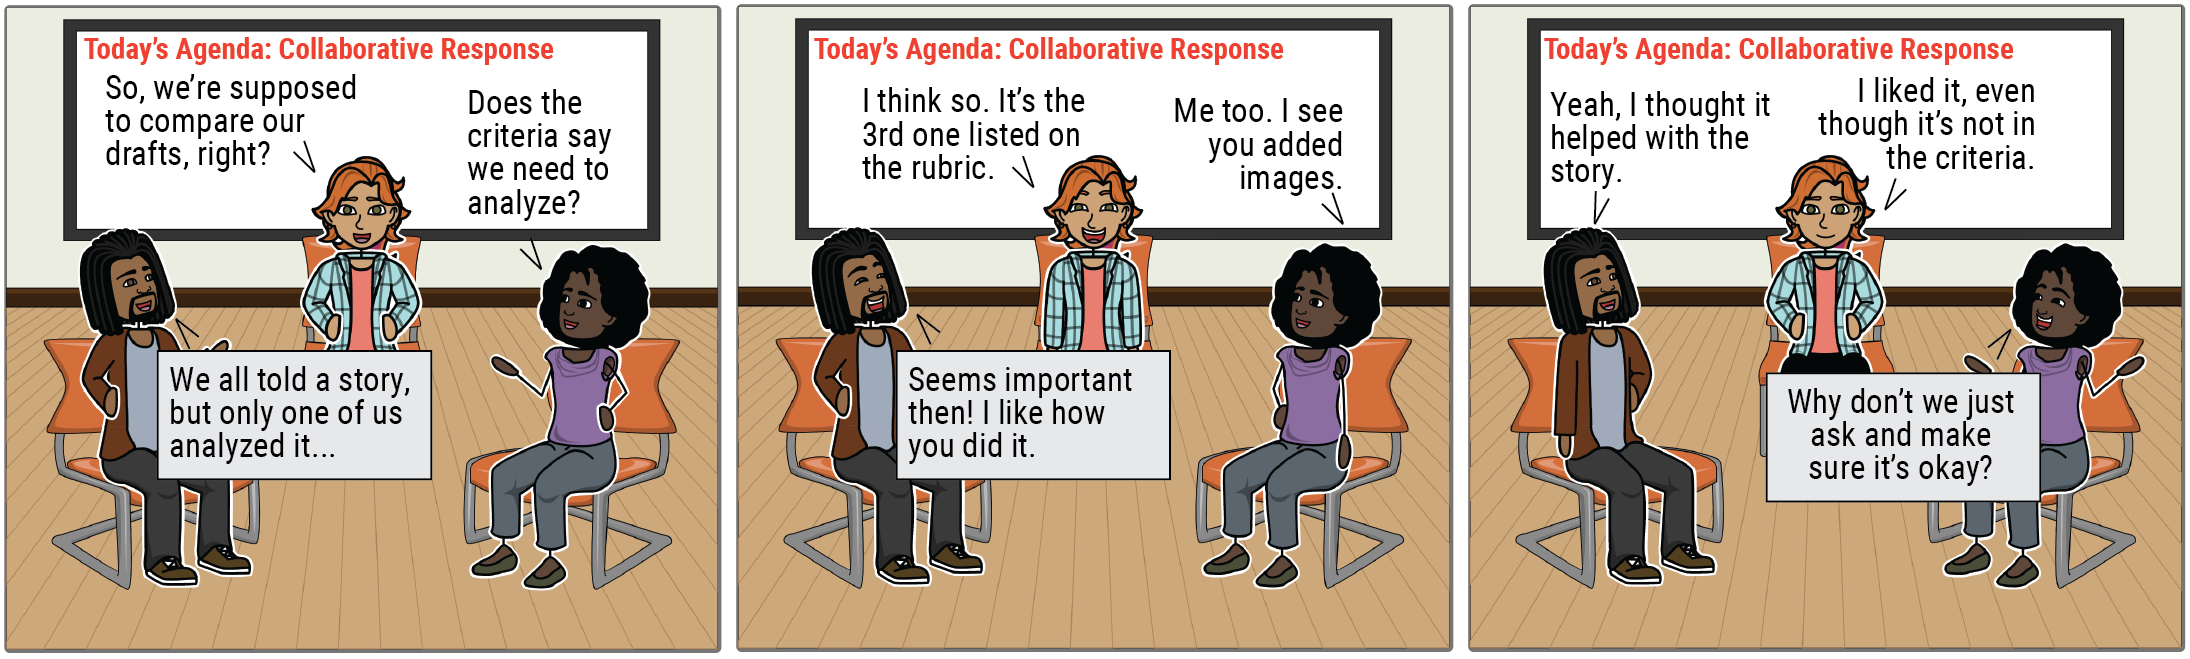 A comic strip shows three students in collaborative response. Student 1: "So, we're supposed to compare our drafts, right?" Student 2: "We all told a story, but only one of us analyzed it." Student 3: "Does the criteria say we need to analyze?" Student 1: "I think so. It's the third one listed on the rubric." Student 2: "Seems important then. I like you you did it." Student 3: "Me too. I see you added images." Student 2: "Yeah, I thought it helped with the story." Student 1: "I liked it, even though it's not on the criteria." Student 3: "Why don't we just ask and make sure it's okay?"